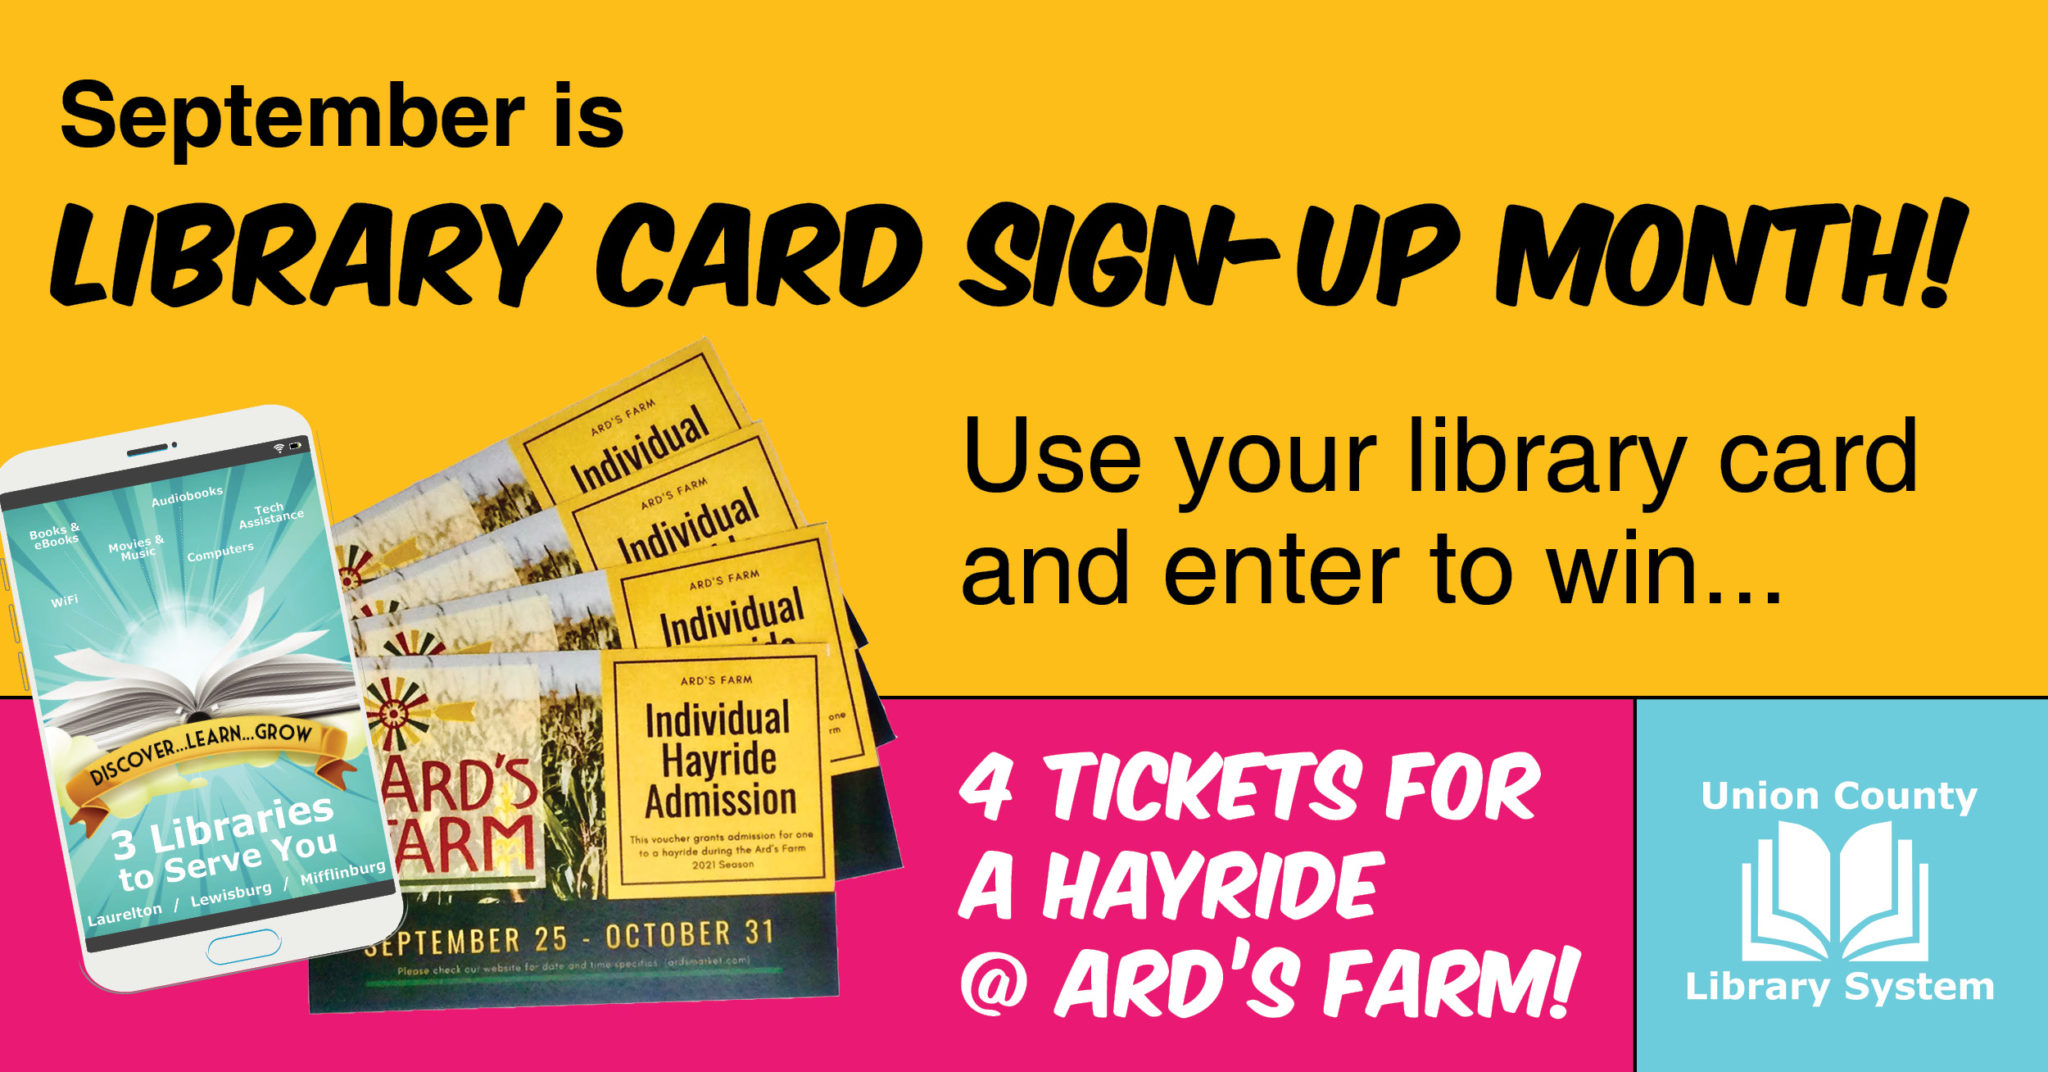 Library Card Sign Up Month Union County Library System